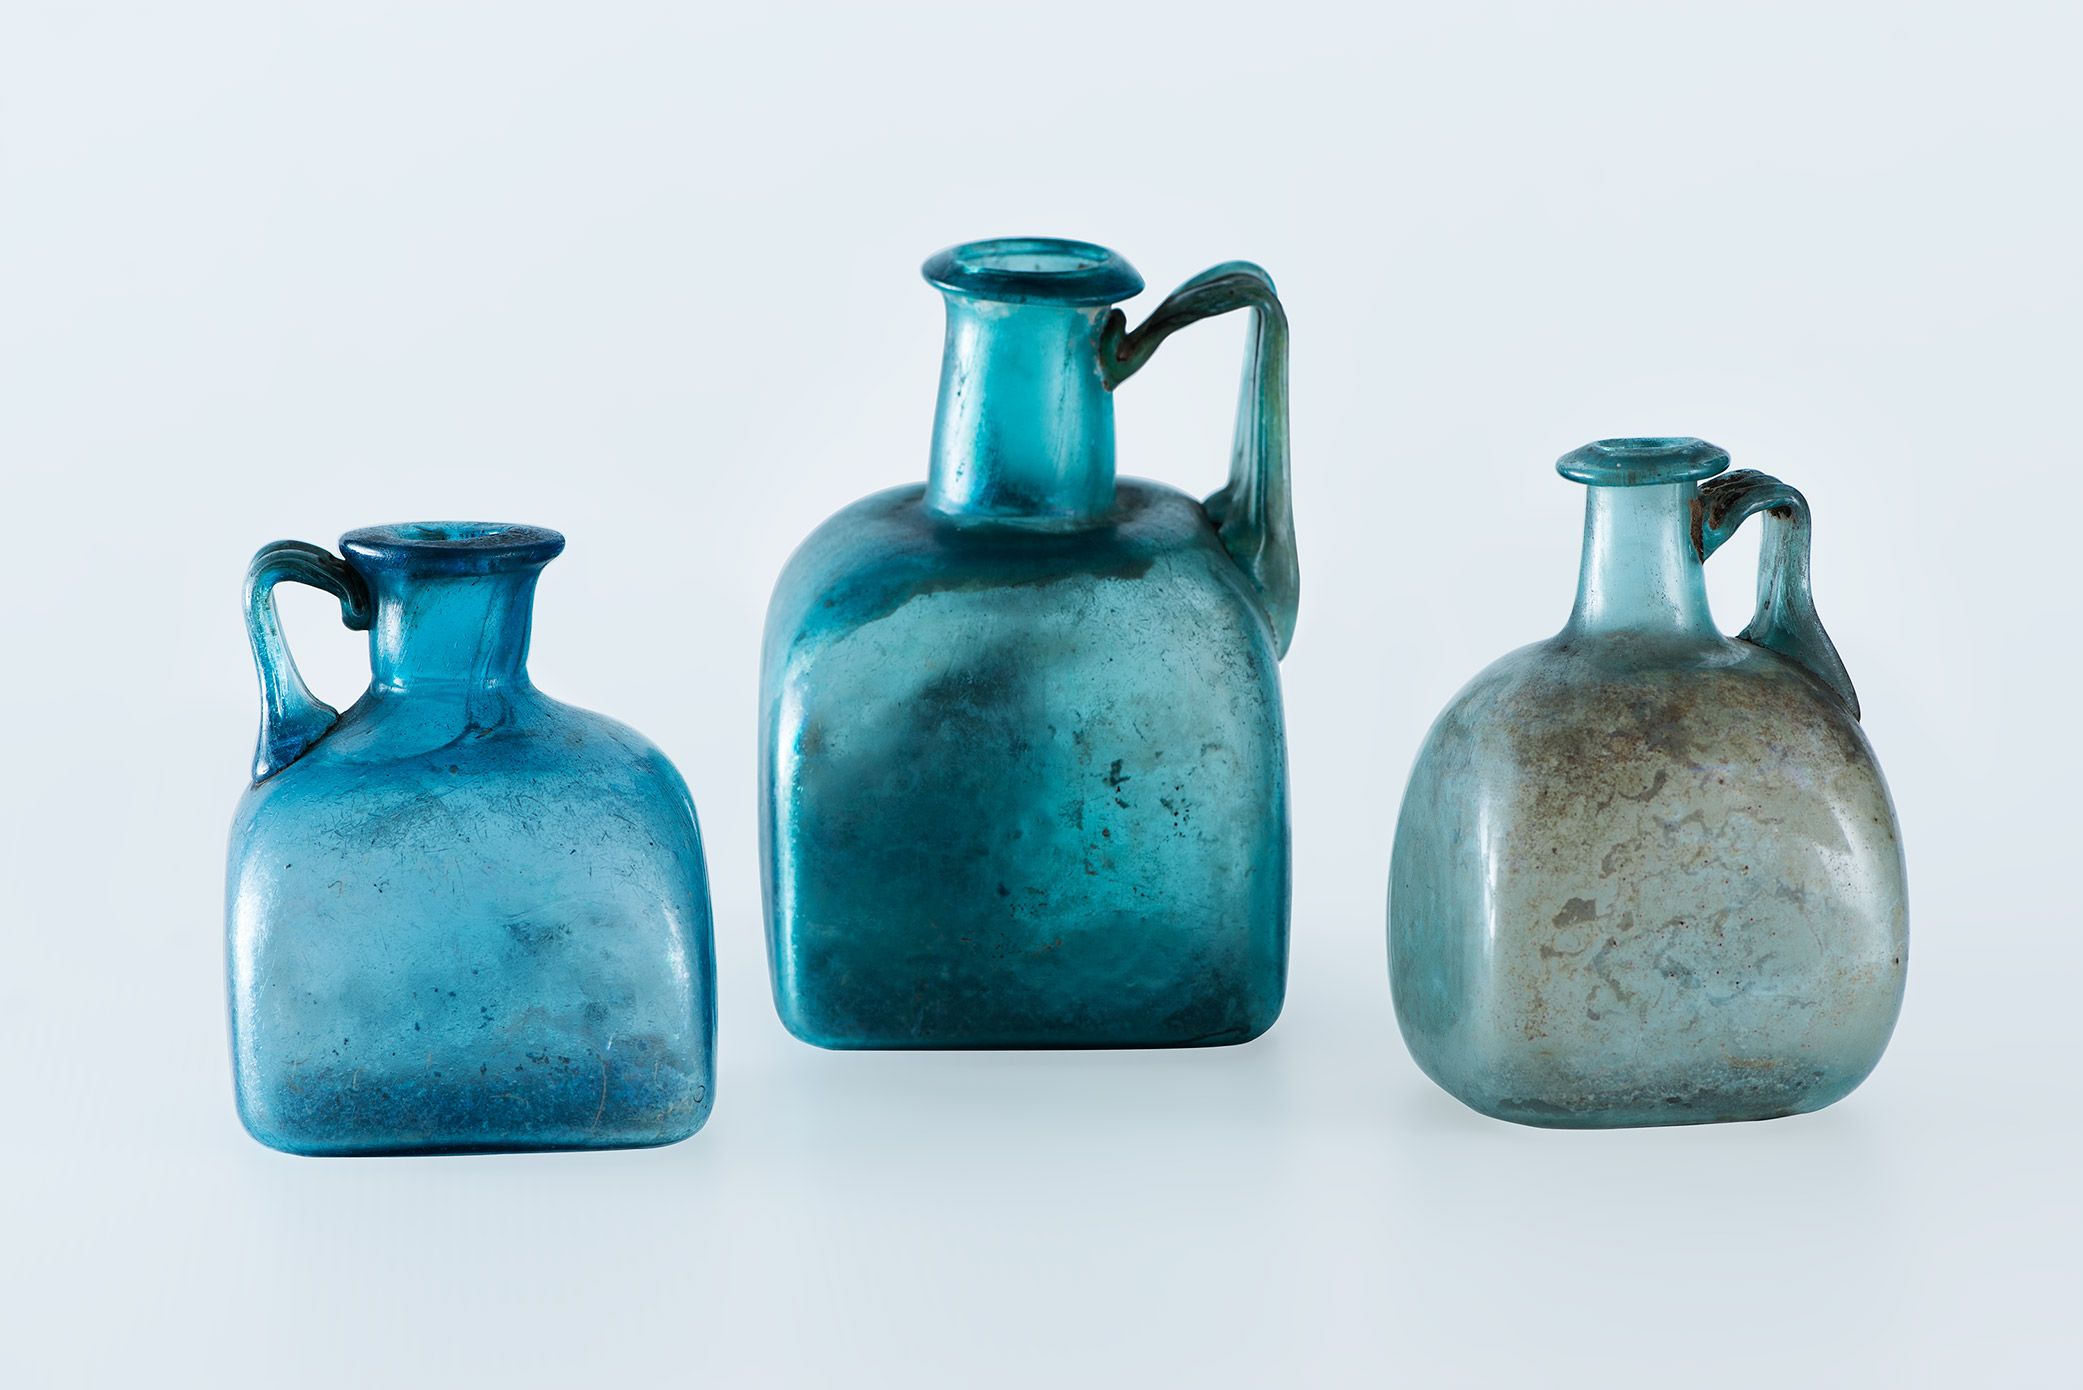 Bottles with square section body